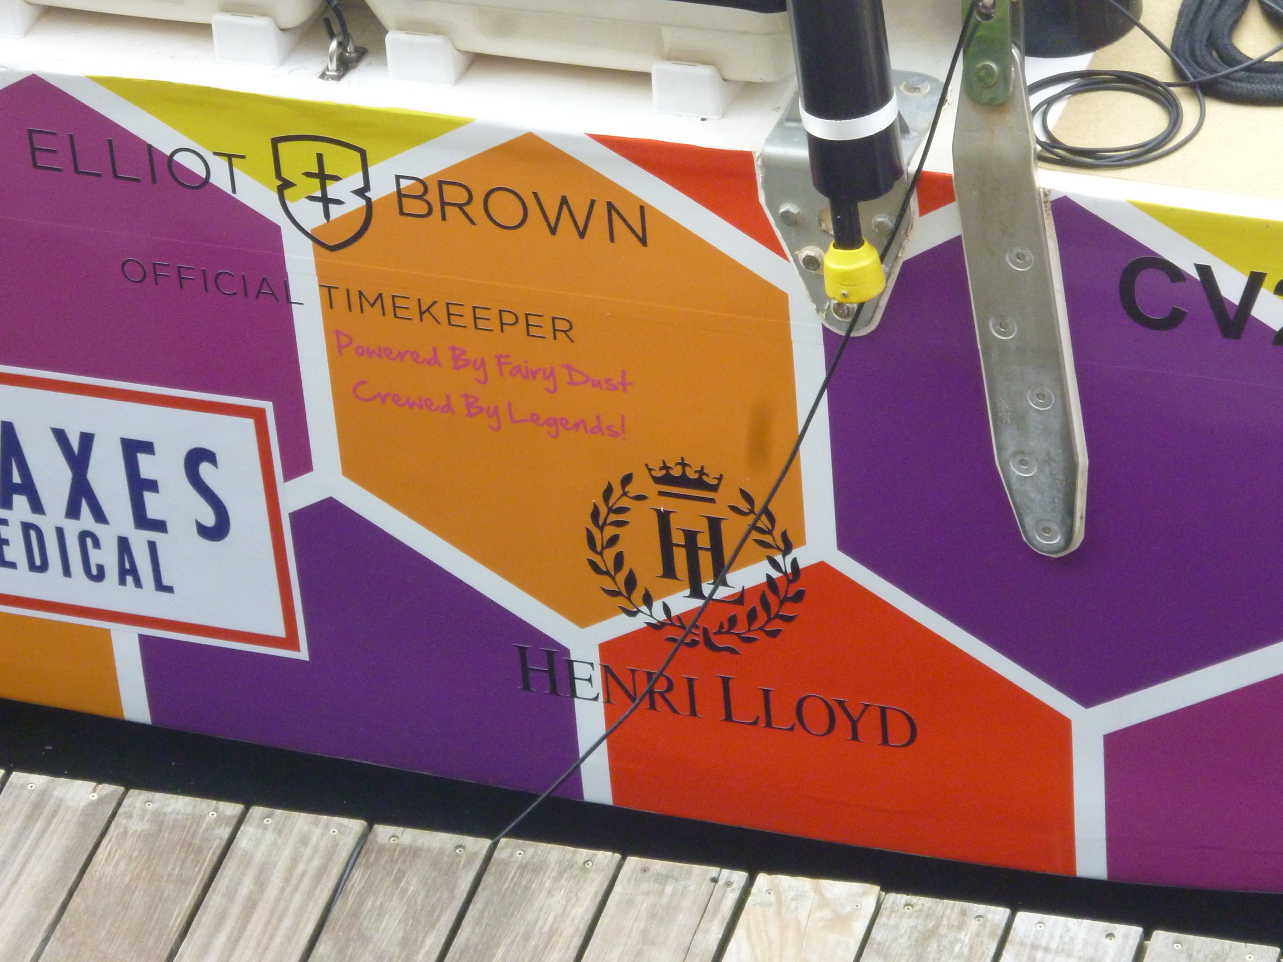 Caption on stern of boat, together with sponsor logos